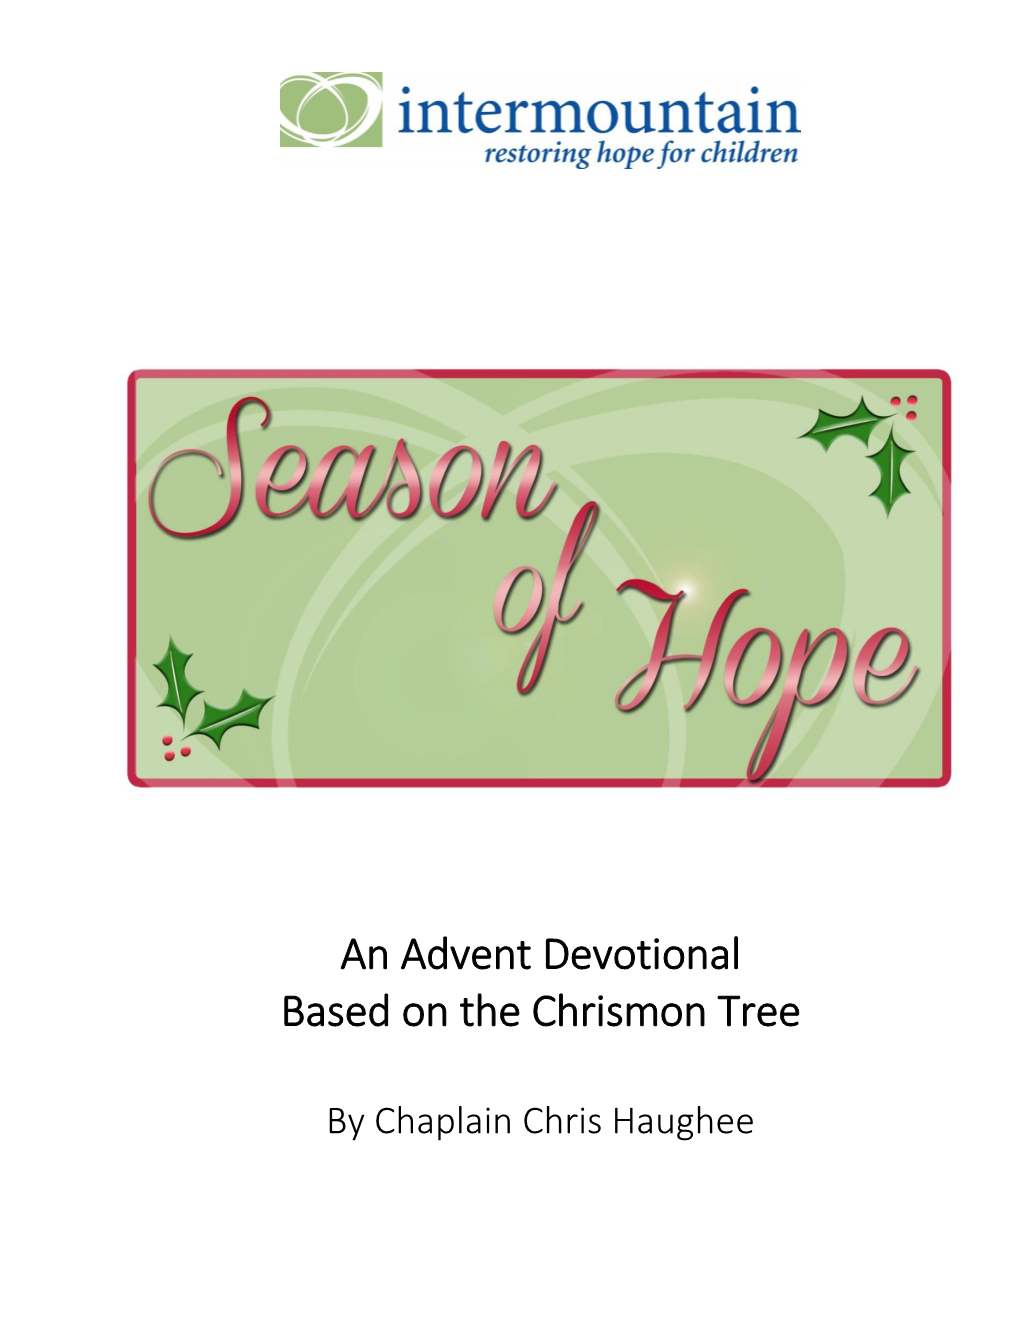 An Advent Devotional Based on the Chrismon Tree